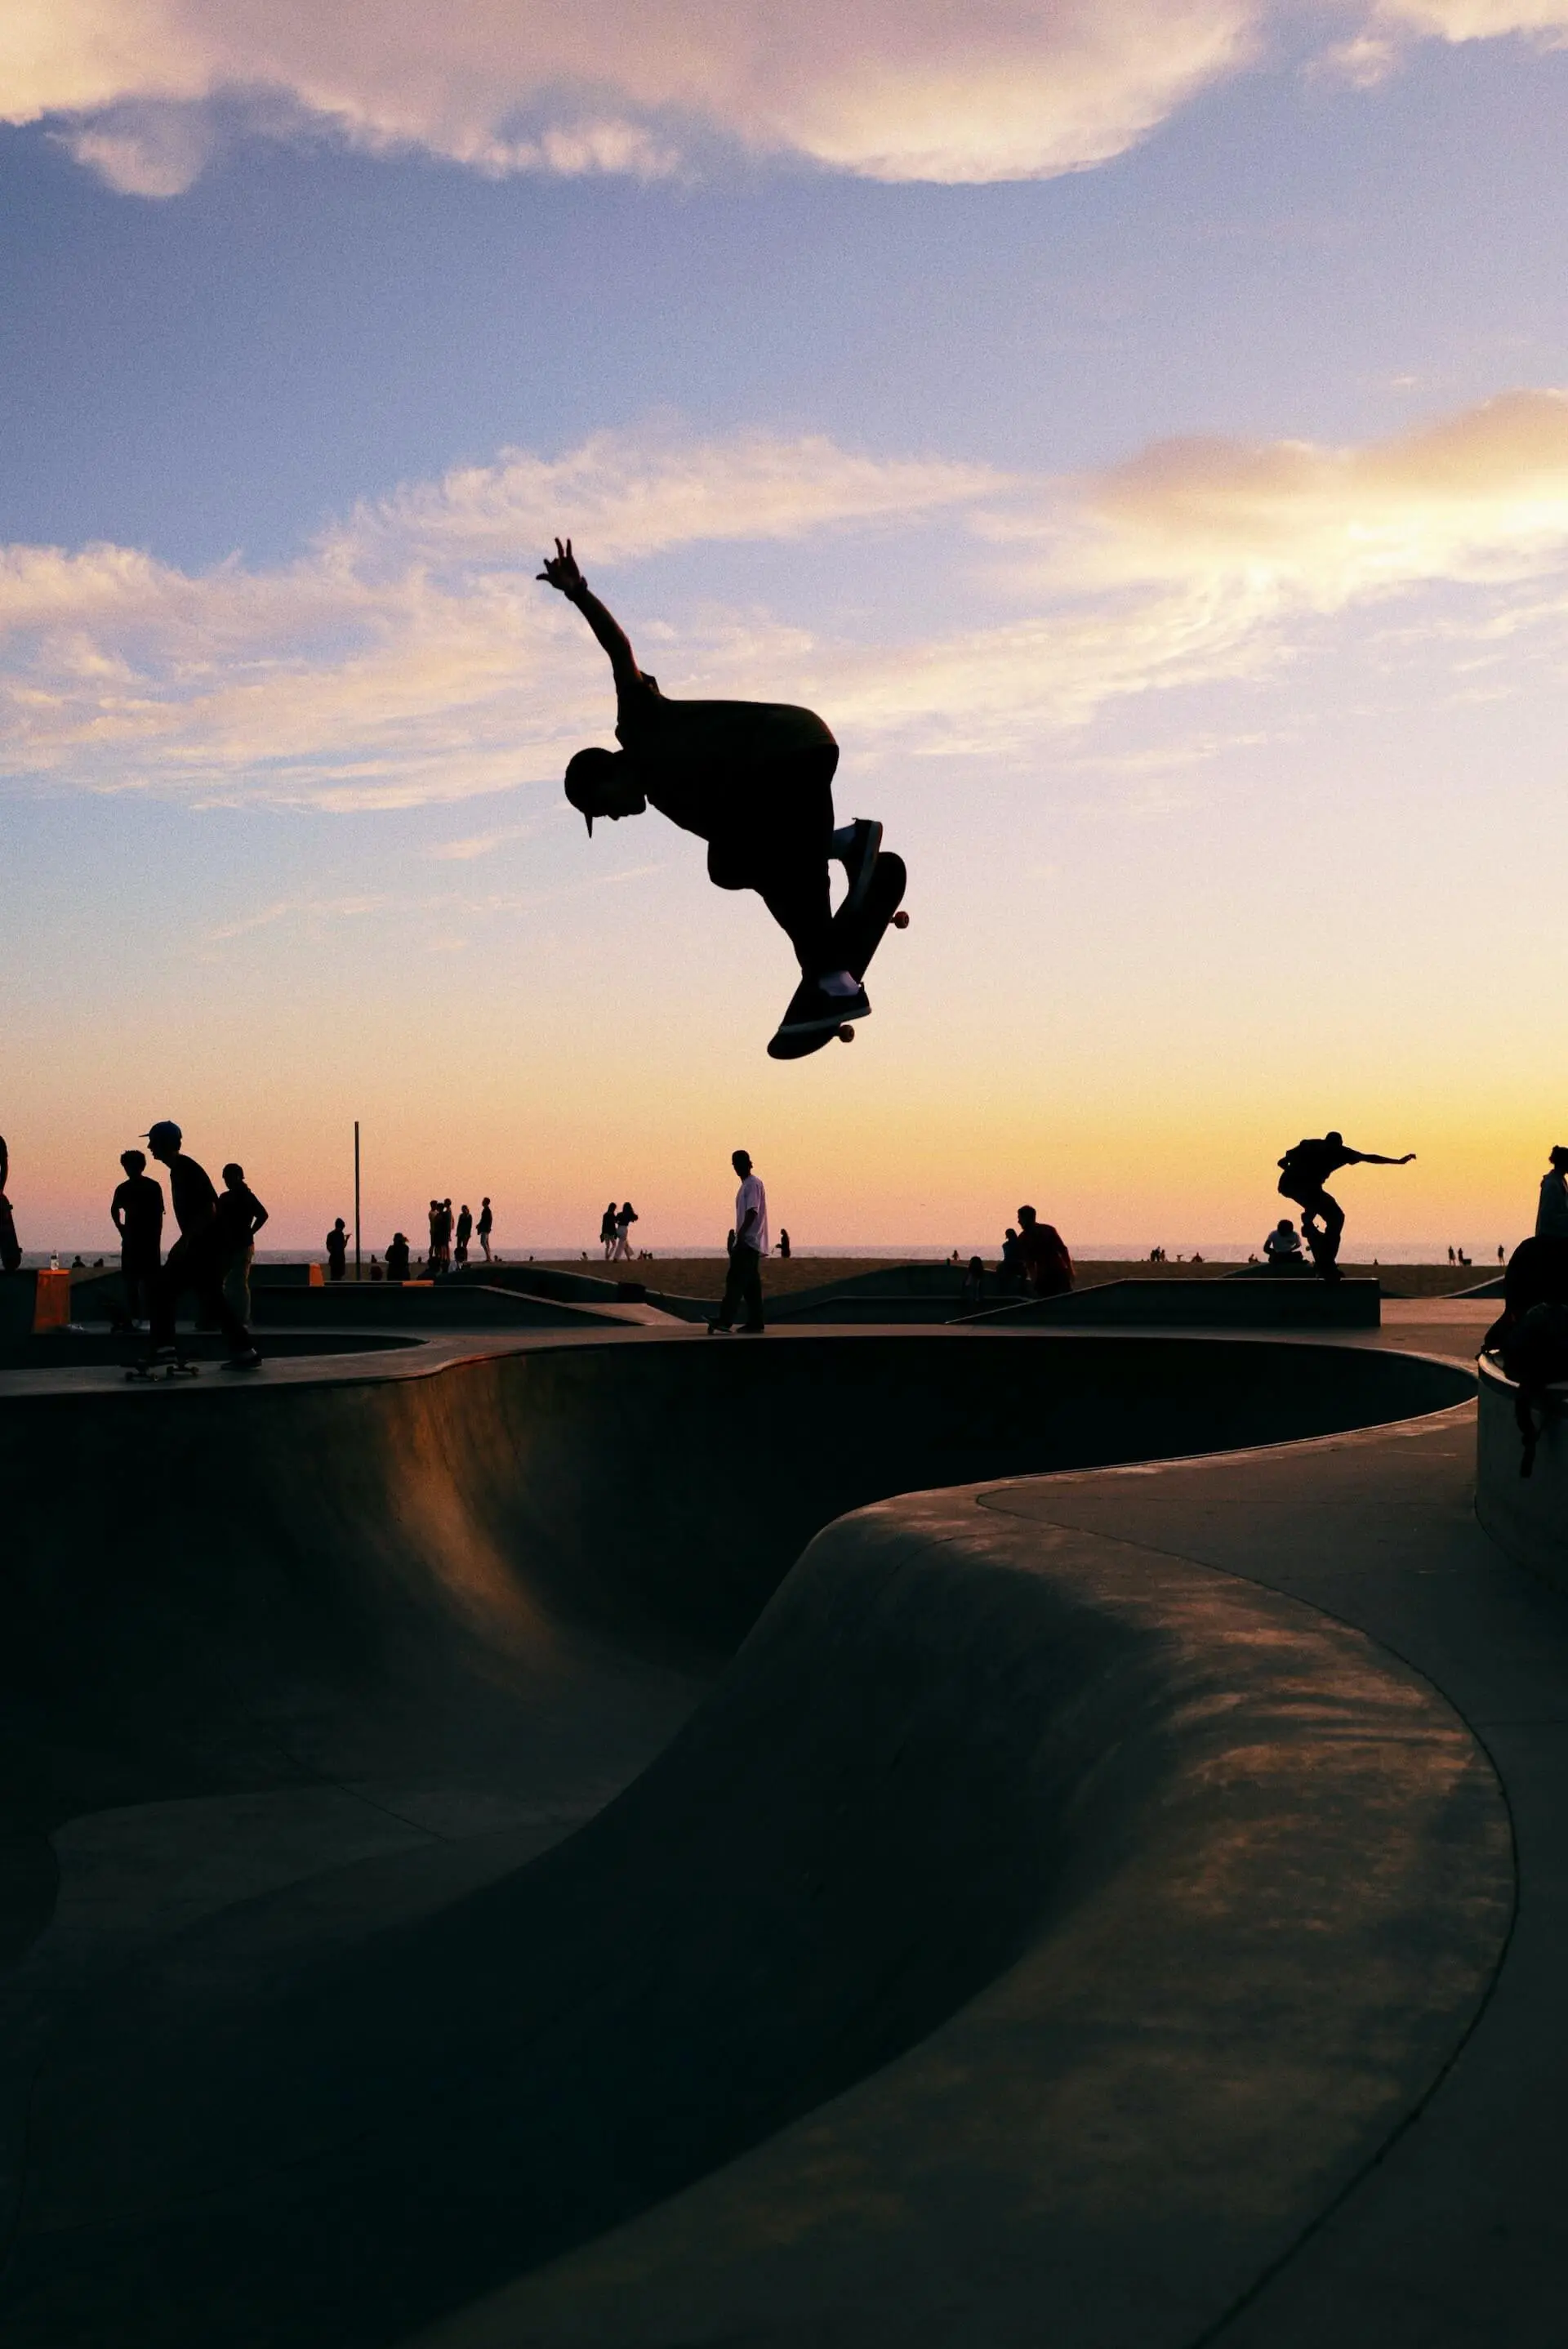 A skateboarder dropping into a bowl